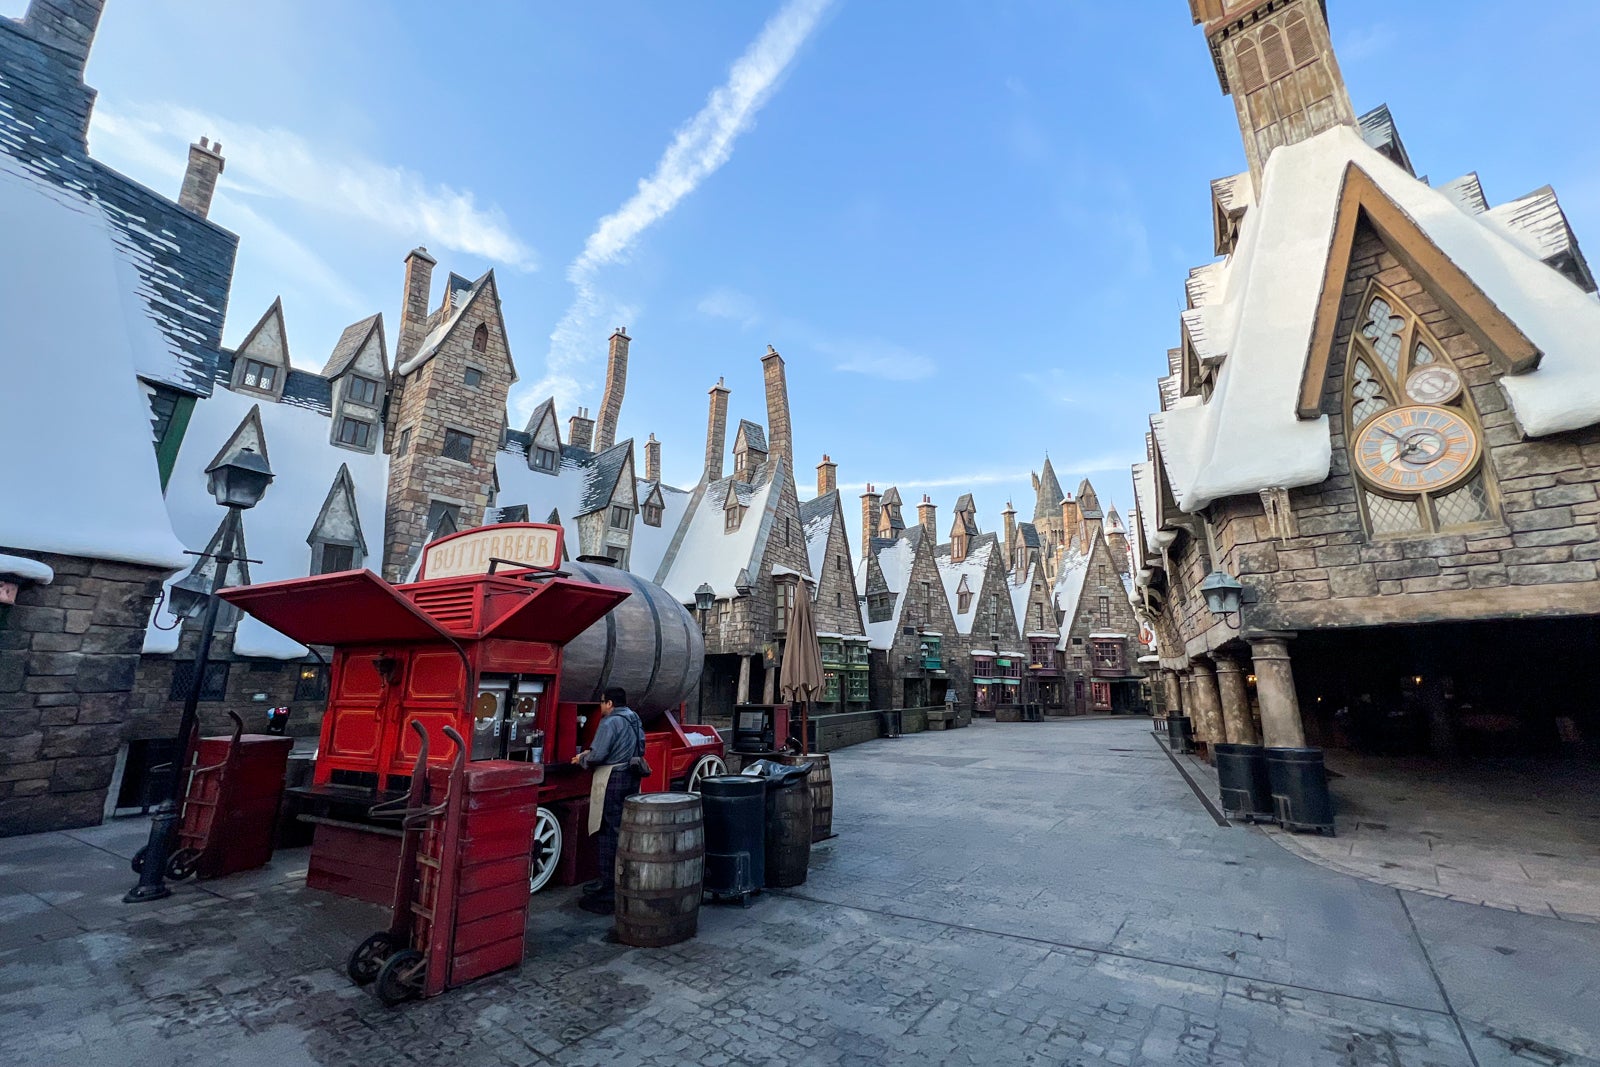 Guide to The Wizarding World of Harry Potter — Hogsmeade at